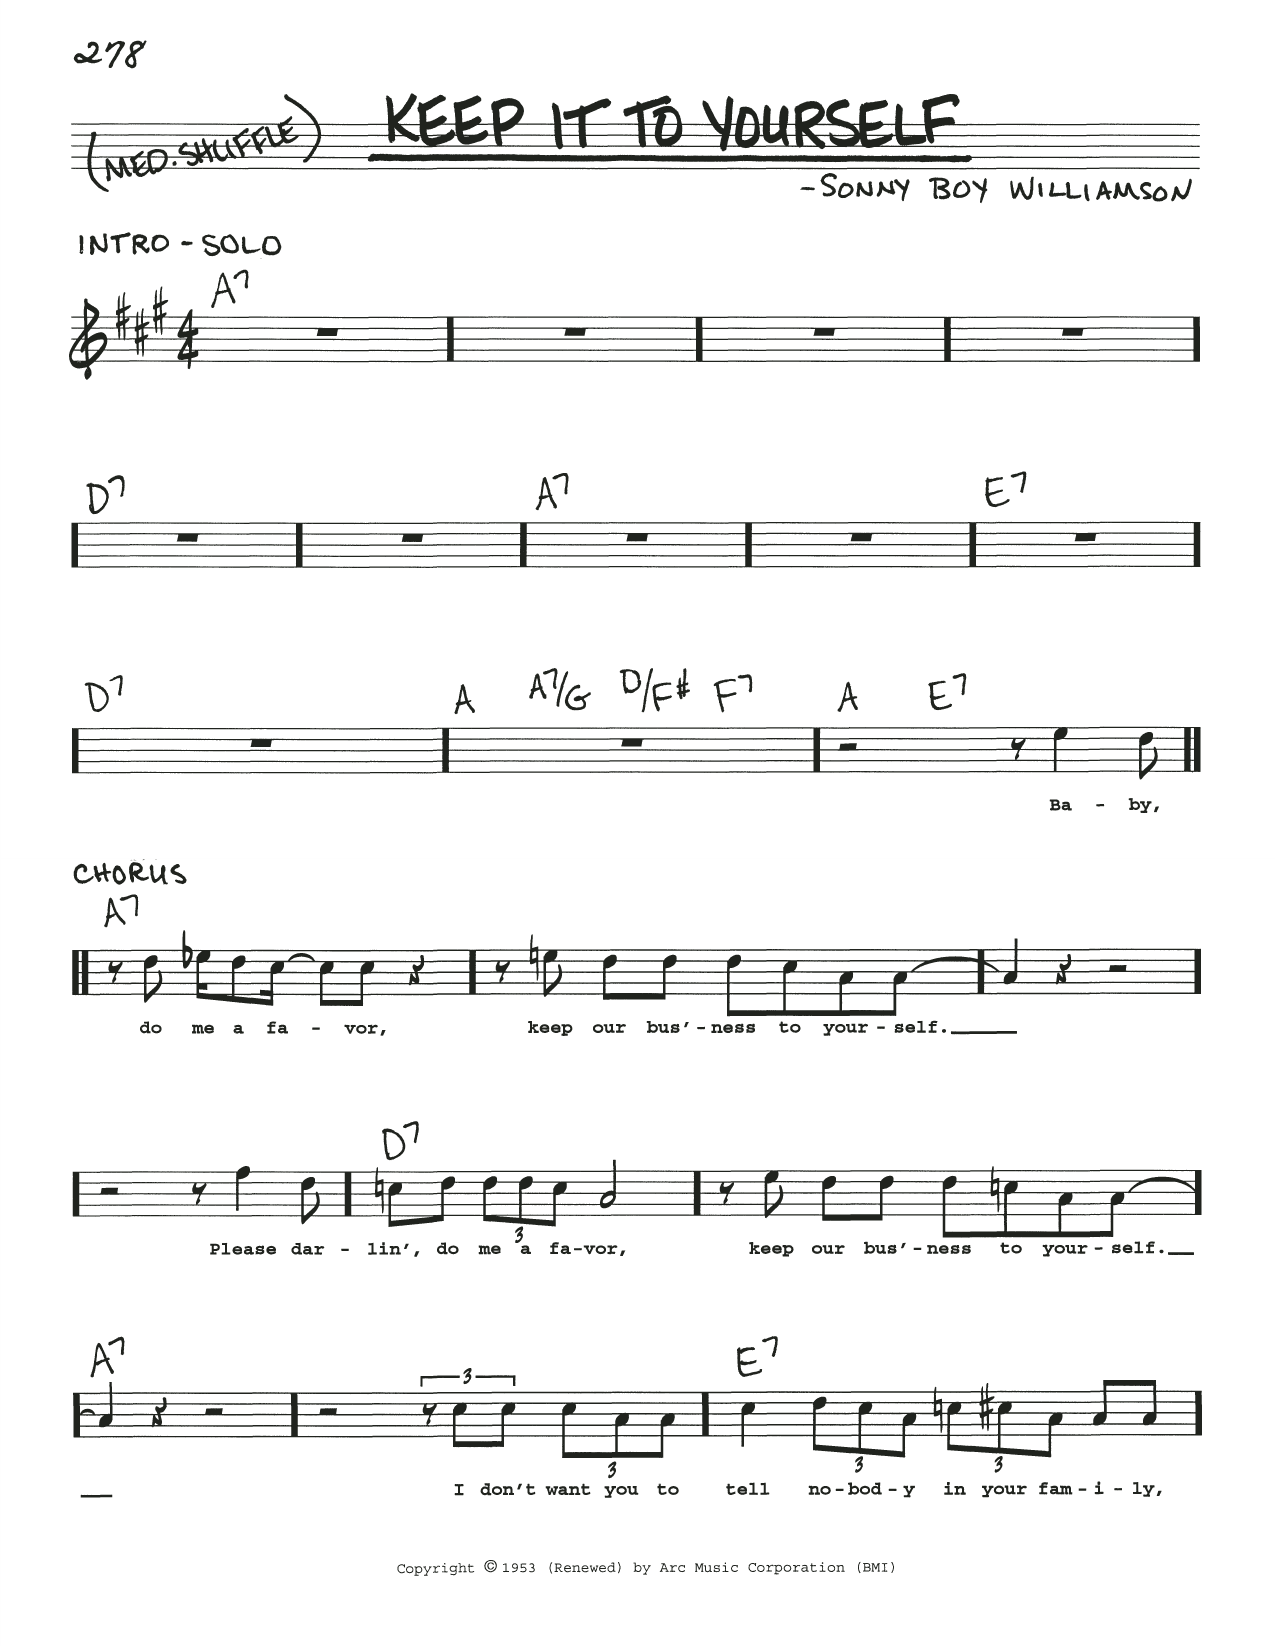 Download Sonny Boy Williamson Keep It To Yourself Sheet Music